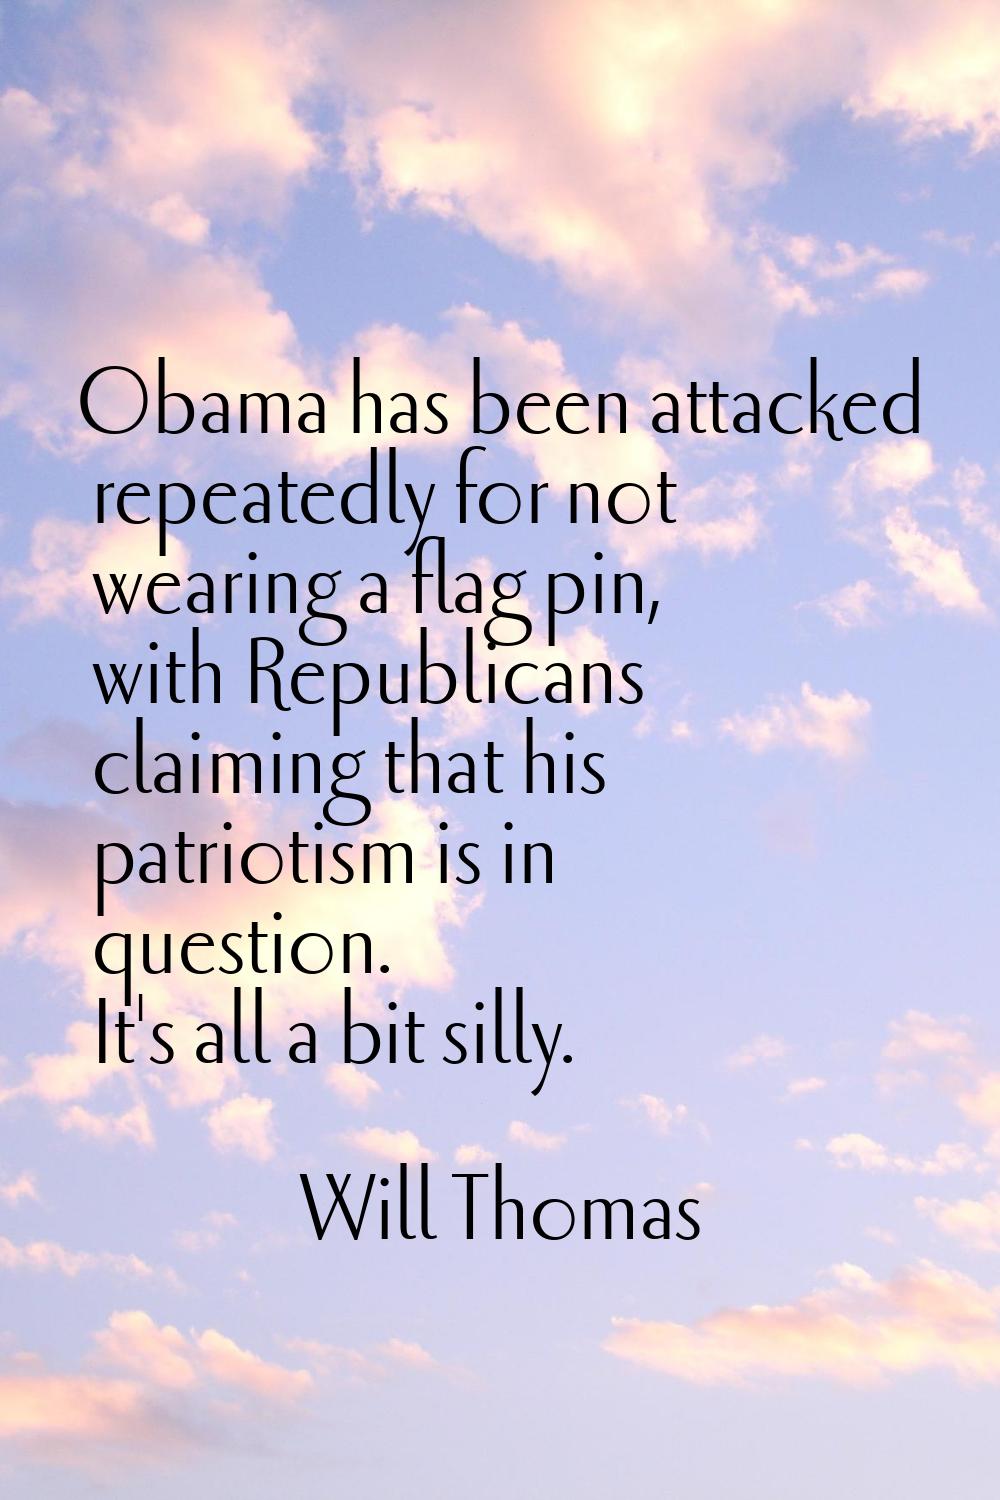 Obama has been attacked repeatedly for not wearing a flag pin, with Republicans claiming that his p